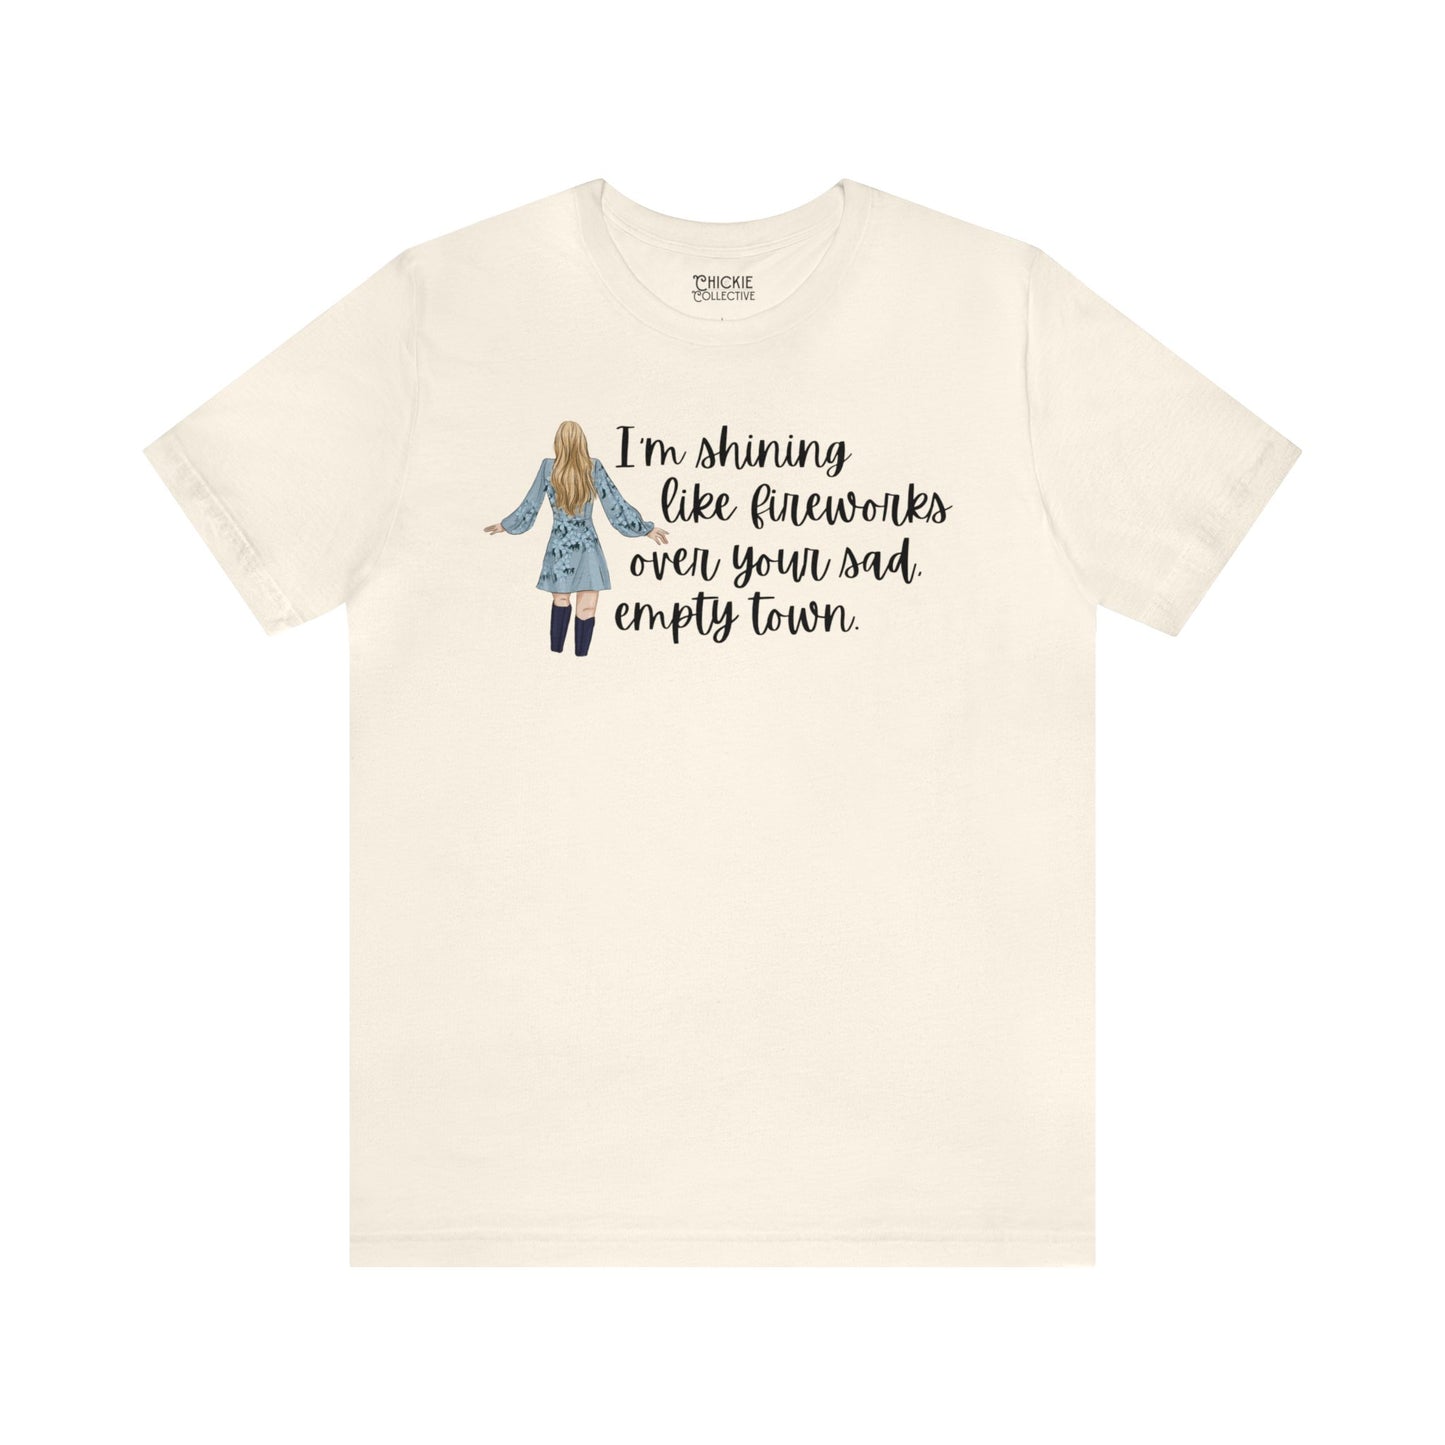 Taylor Swift Preppy Picture T-Shirt - I'm Shining Like Fireworks